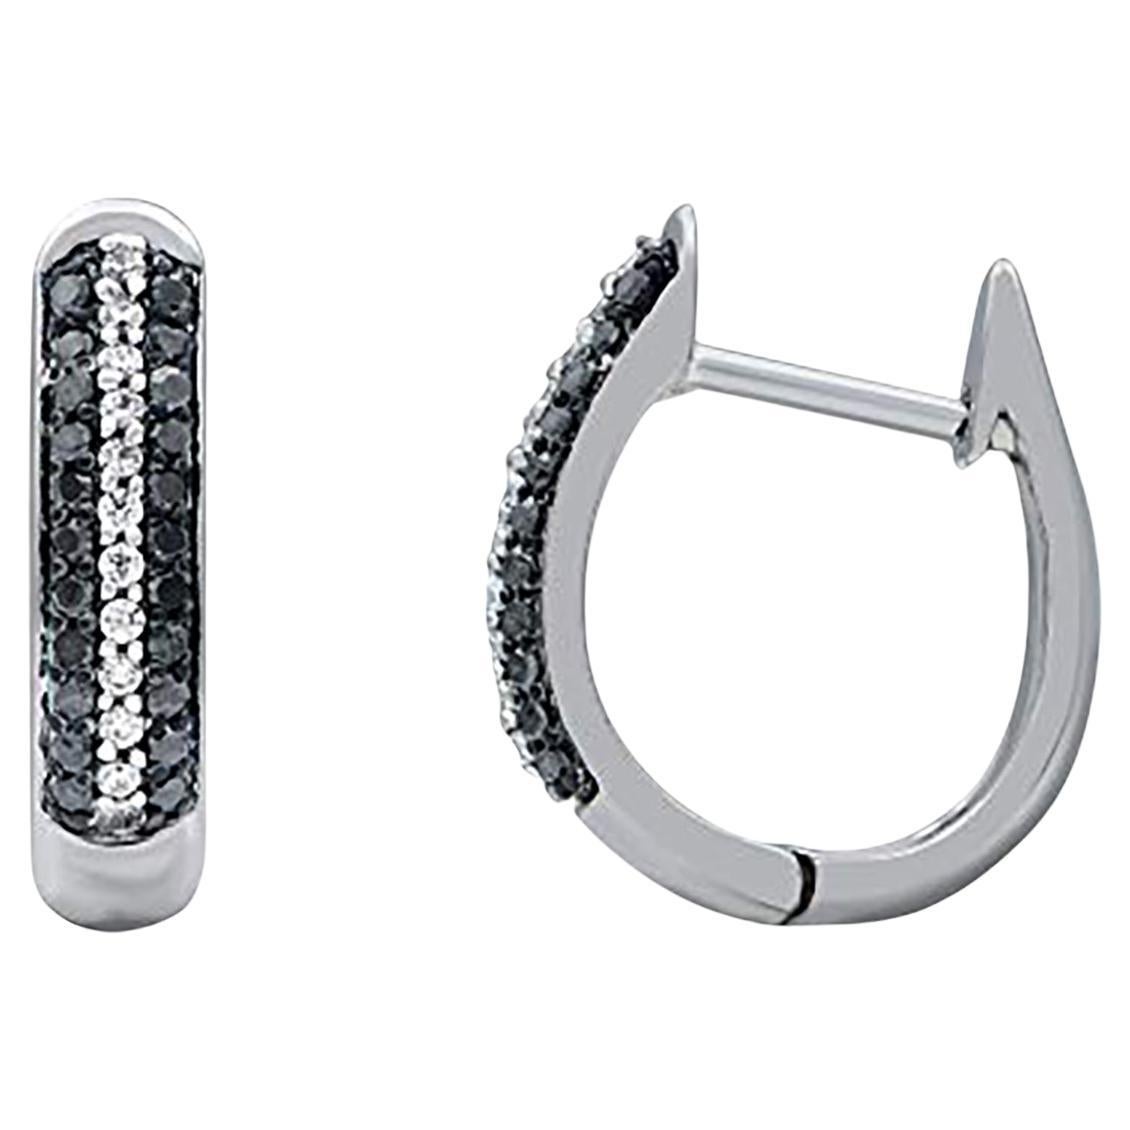 Bring charm to your look with this diamond hoop earrings. This earring is beautifully designed and studded with 66 single cut round diamond and black treated diamonds set in pave setting. We only use natural, 100% conflict free diamonds which shines